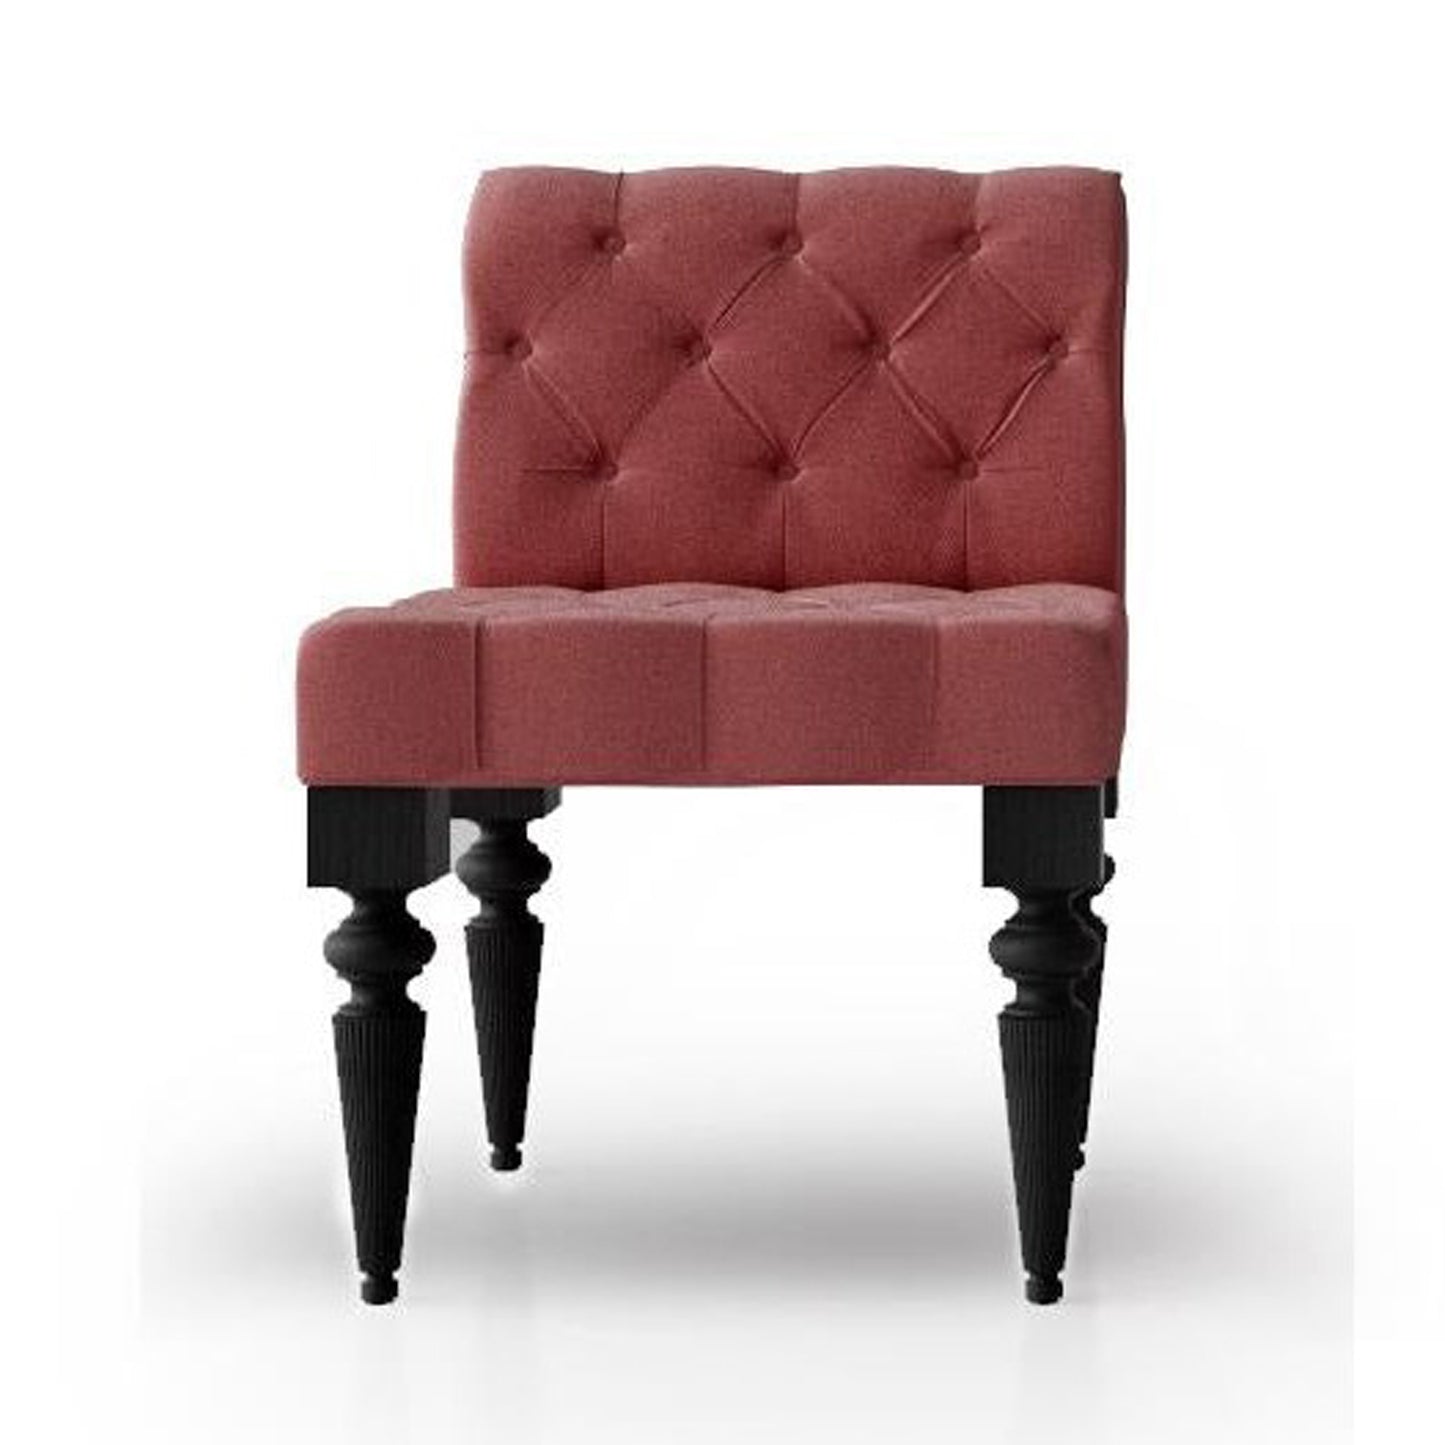 Diva Classic Deep Buttoned Upholstered Chair by Imperial Line